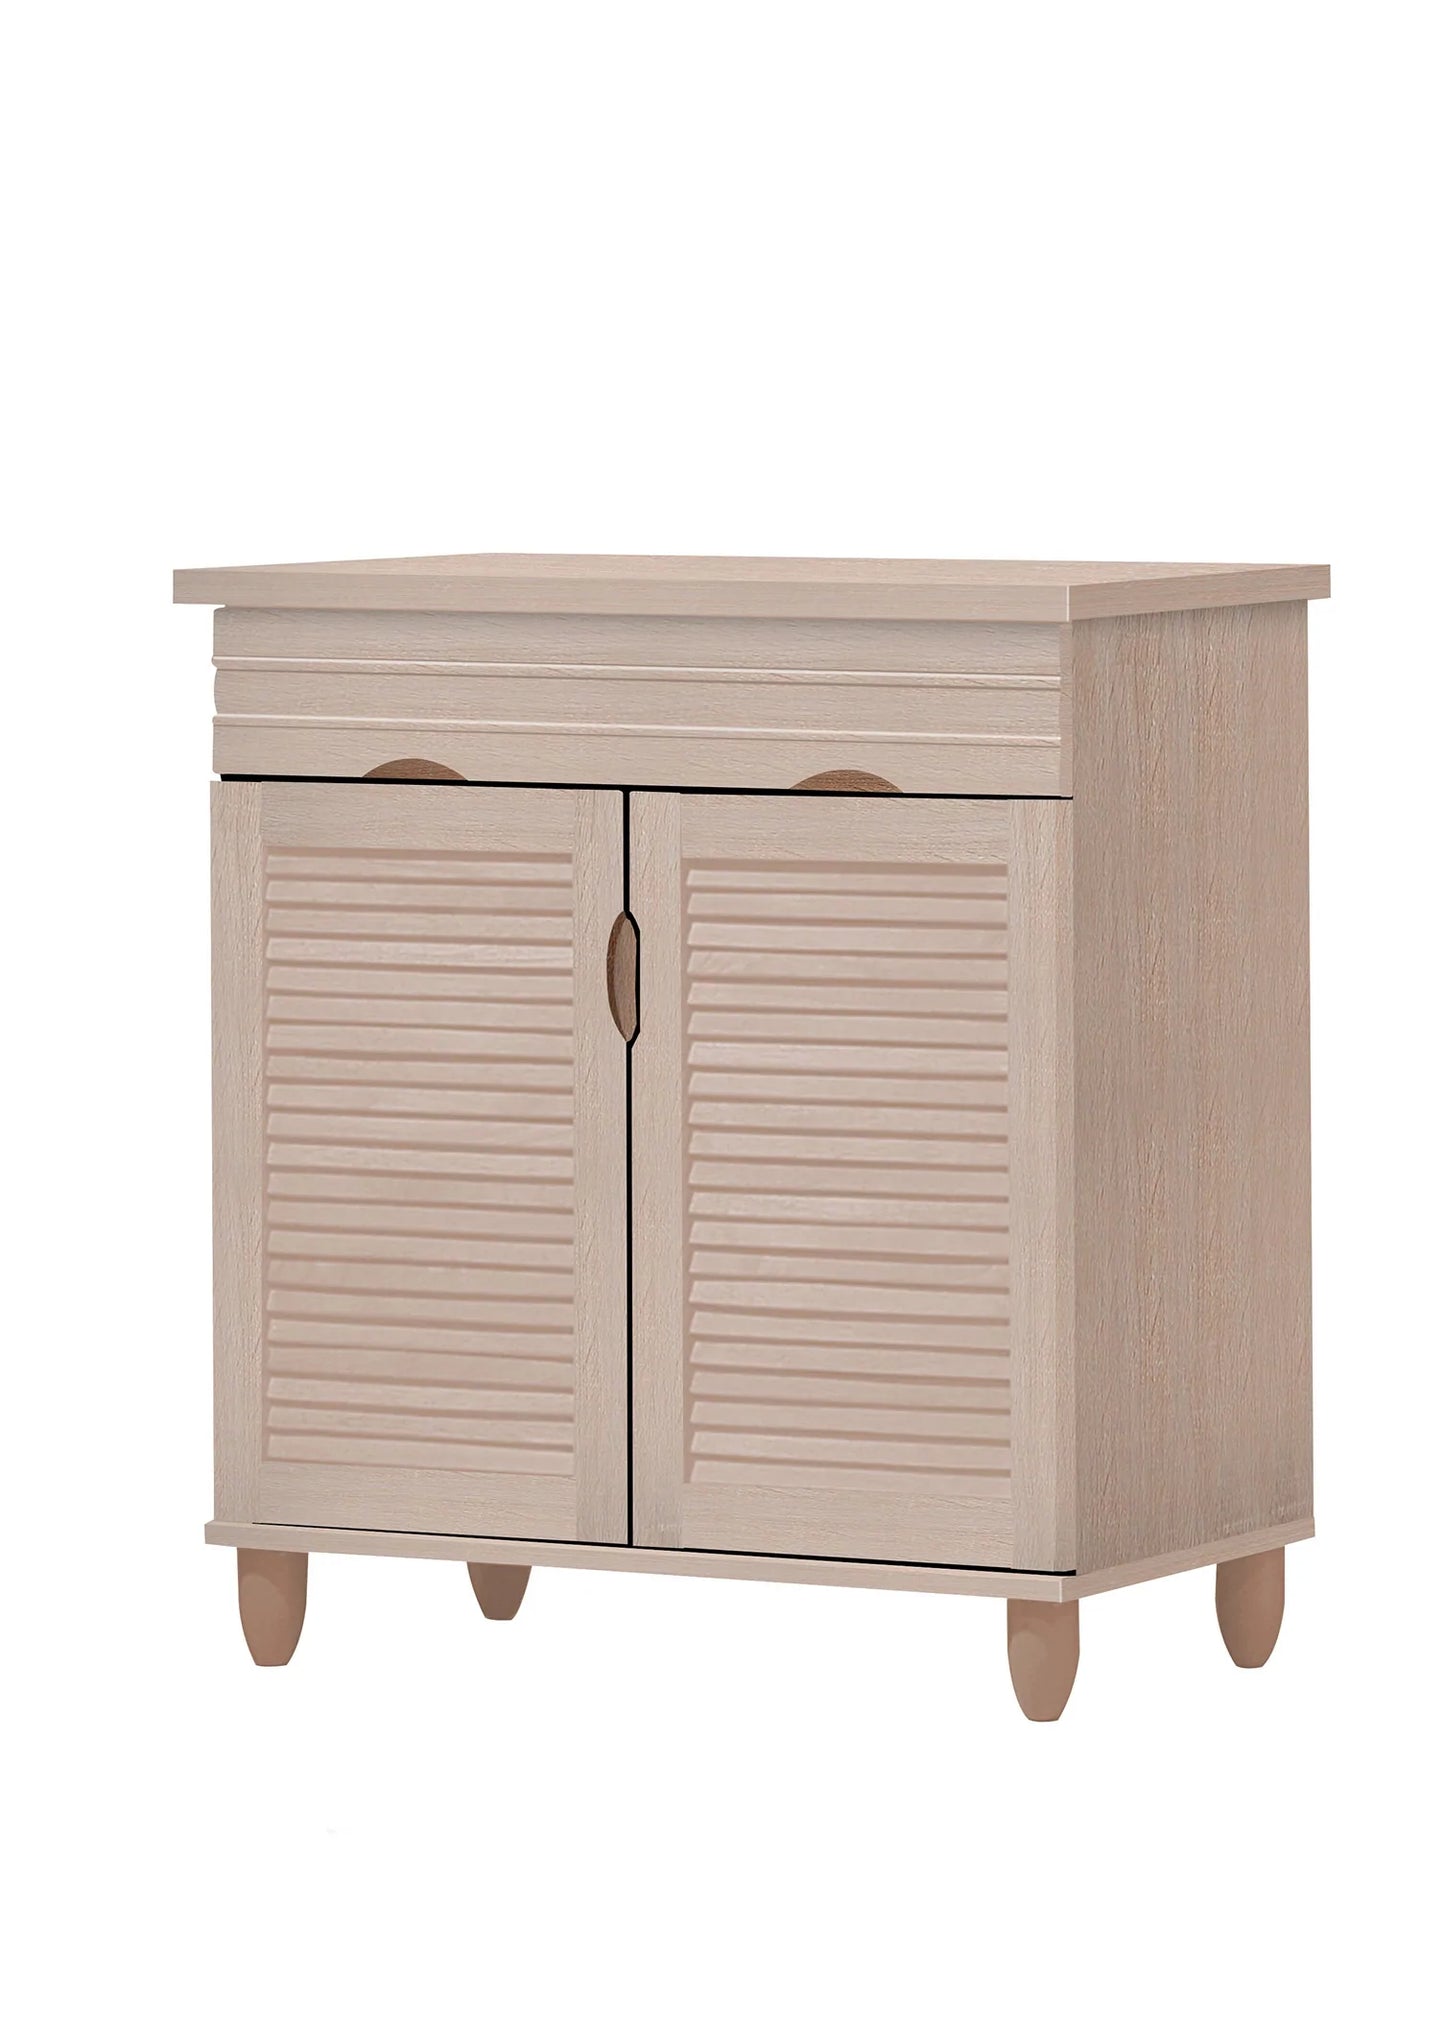 Shoe Cabinet Drawer & 2 Shelves Comes in Espresso or Natural Finish